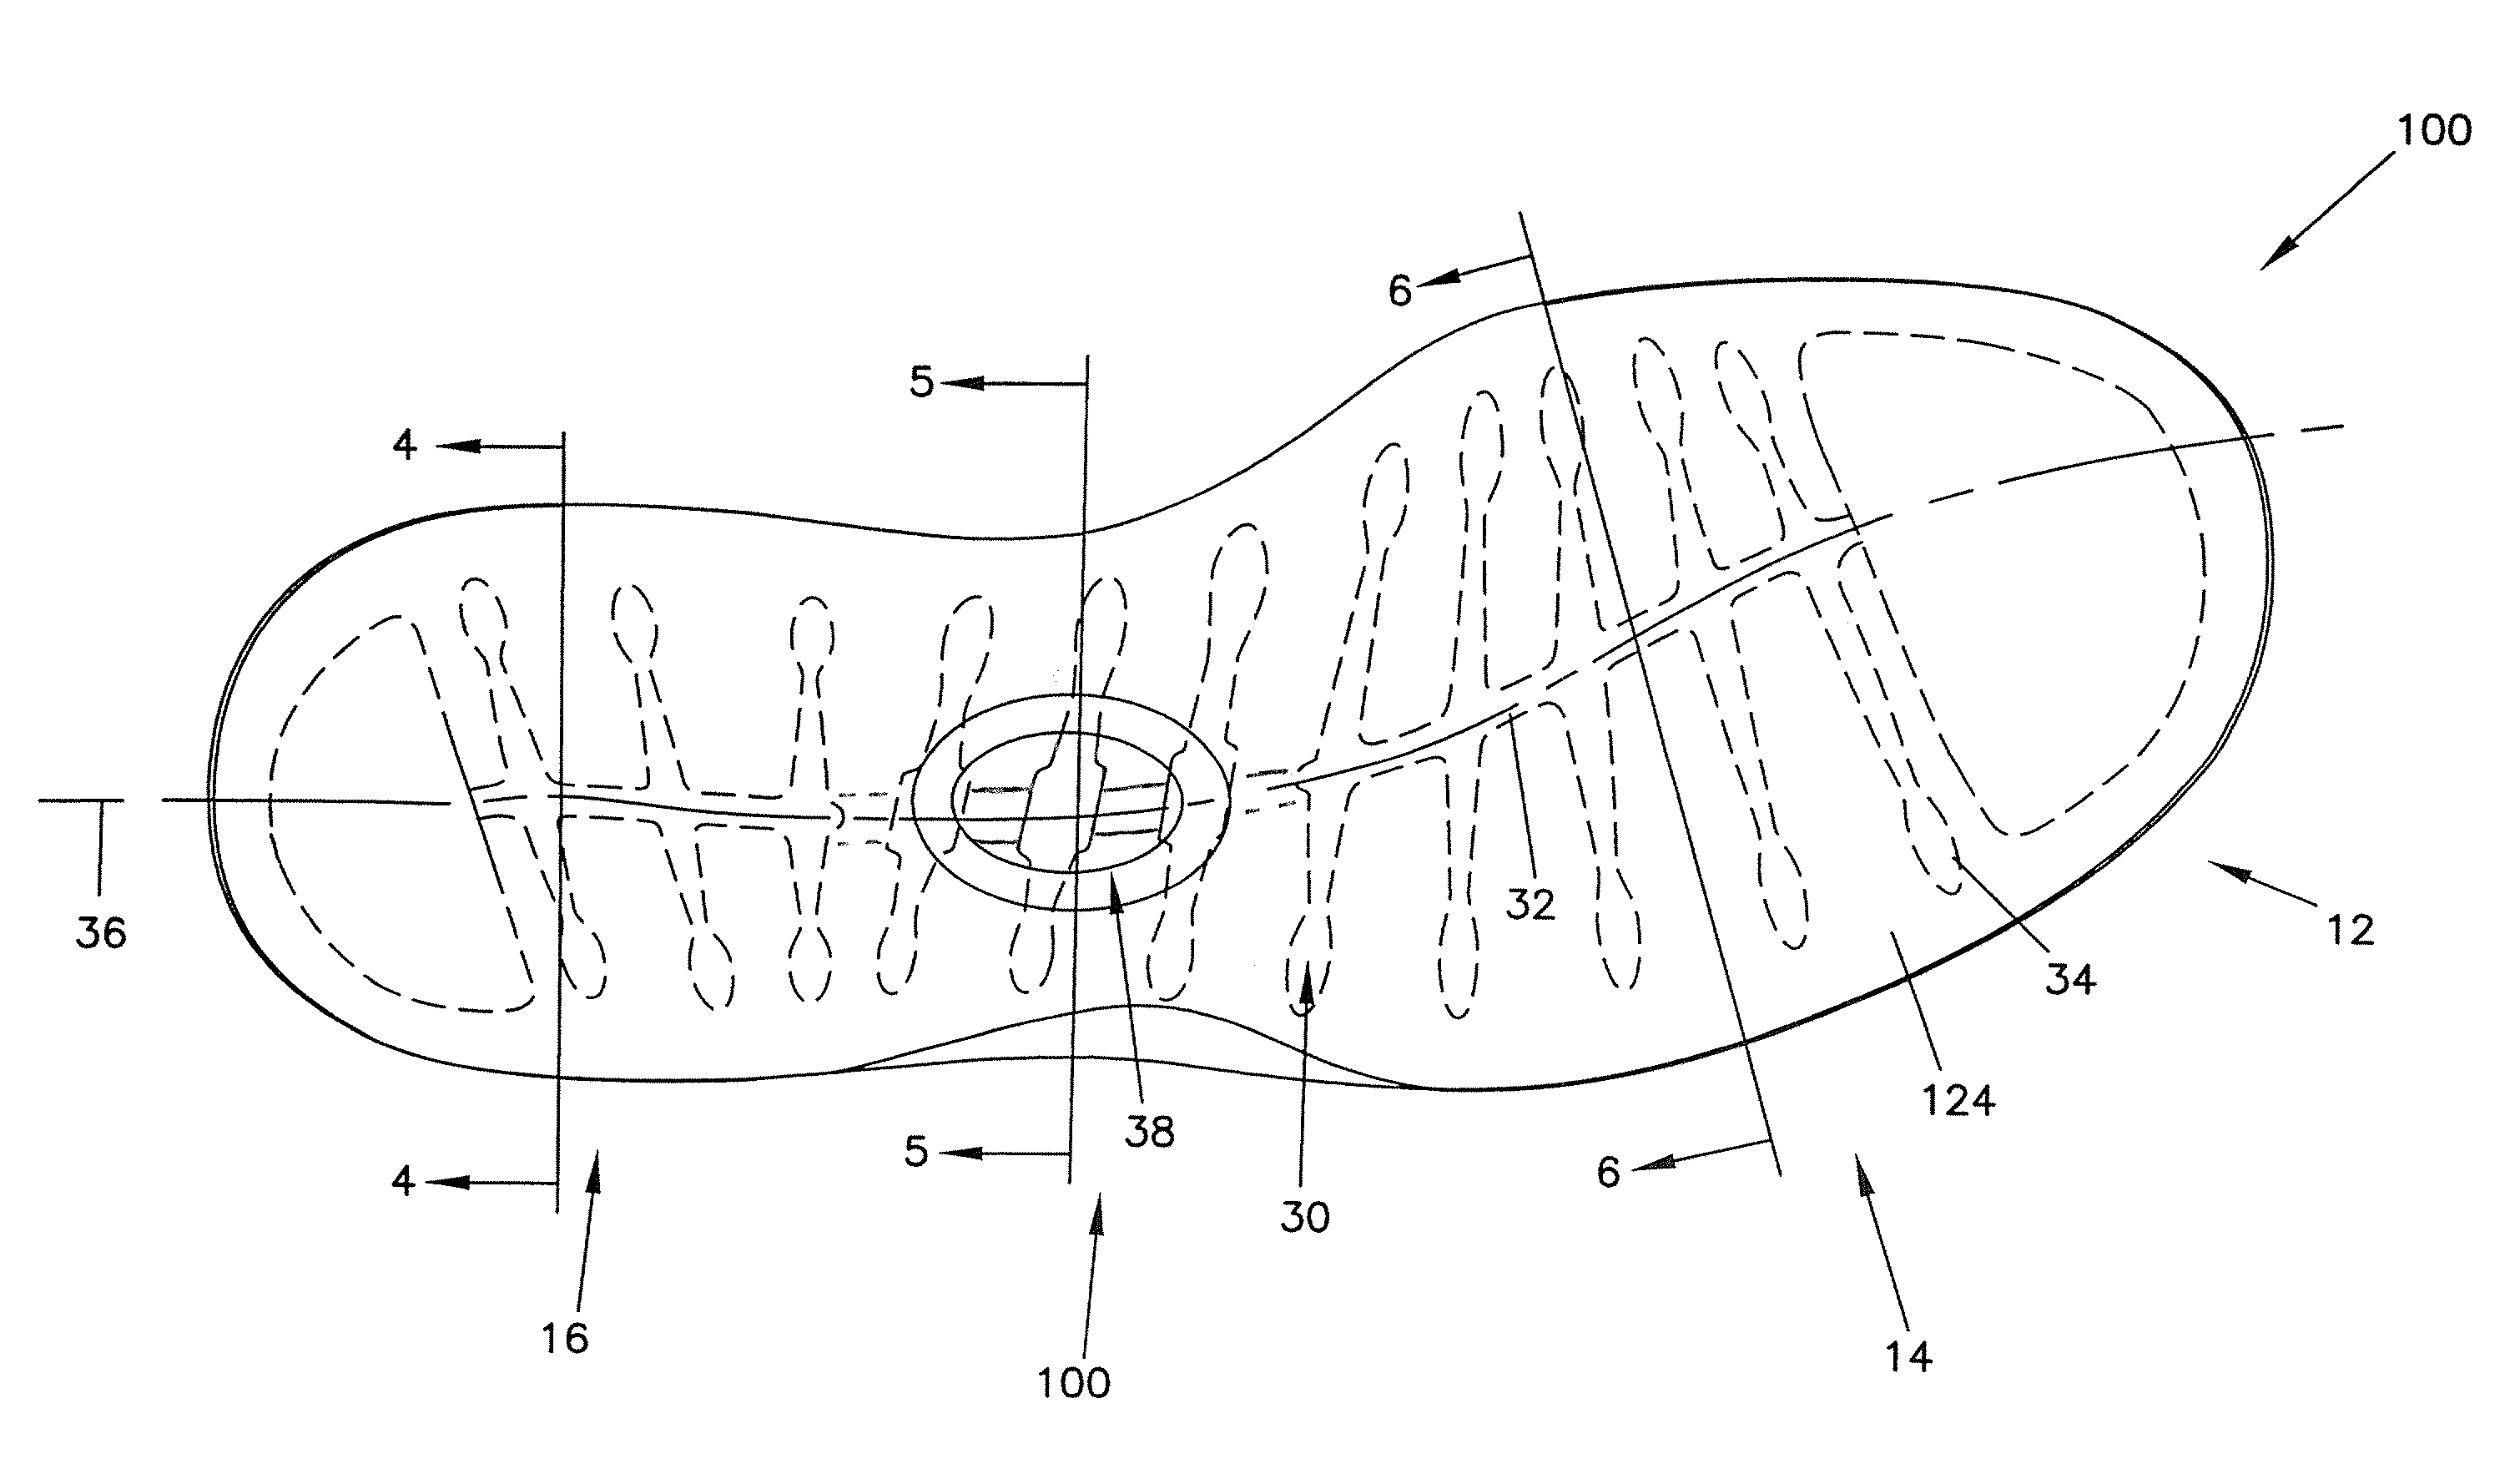 Integral spine structure for footwear